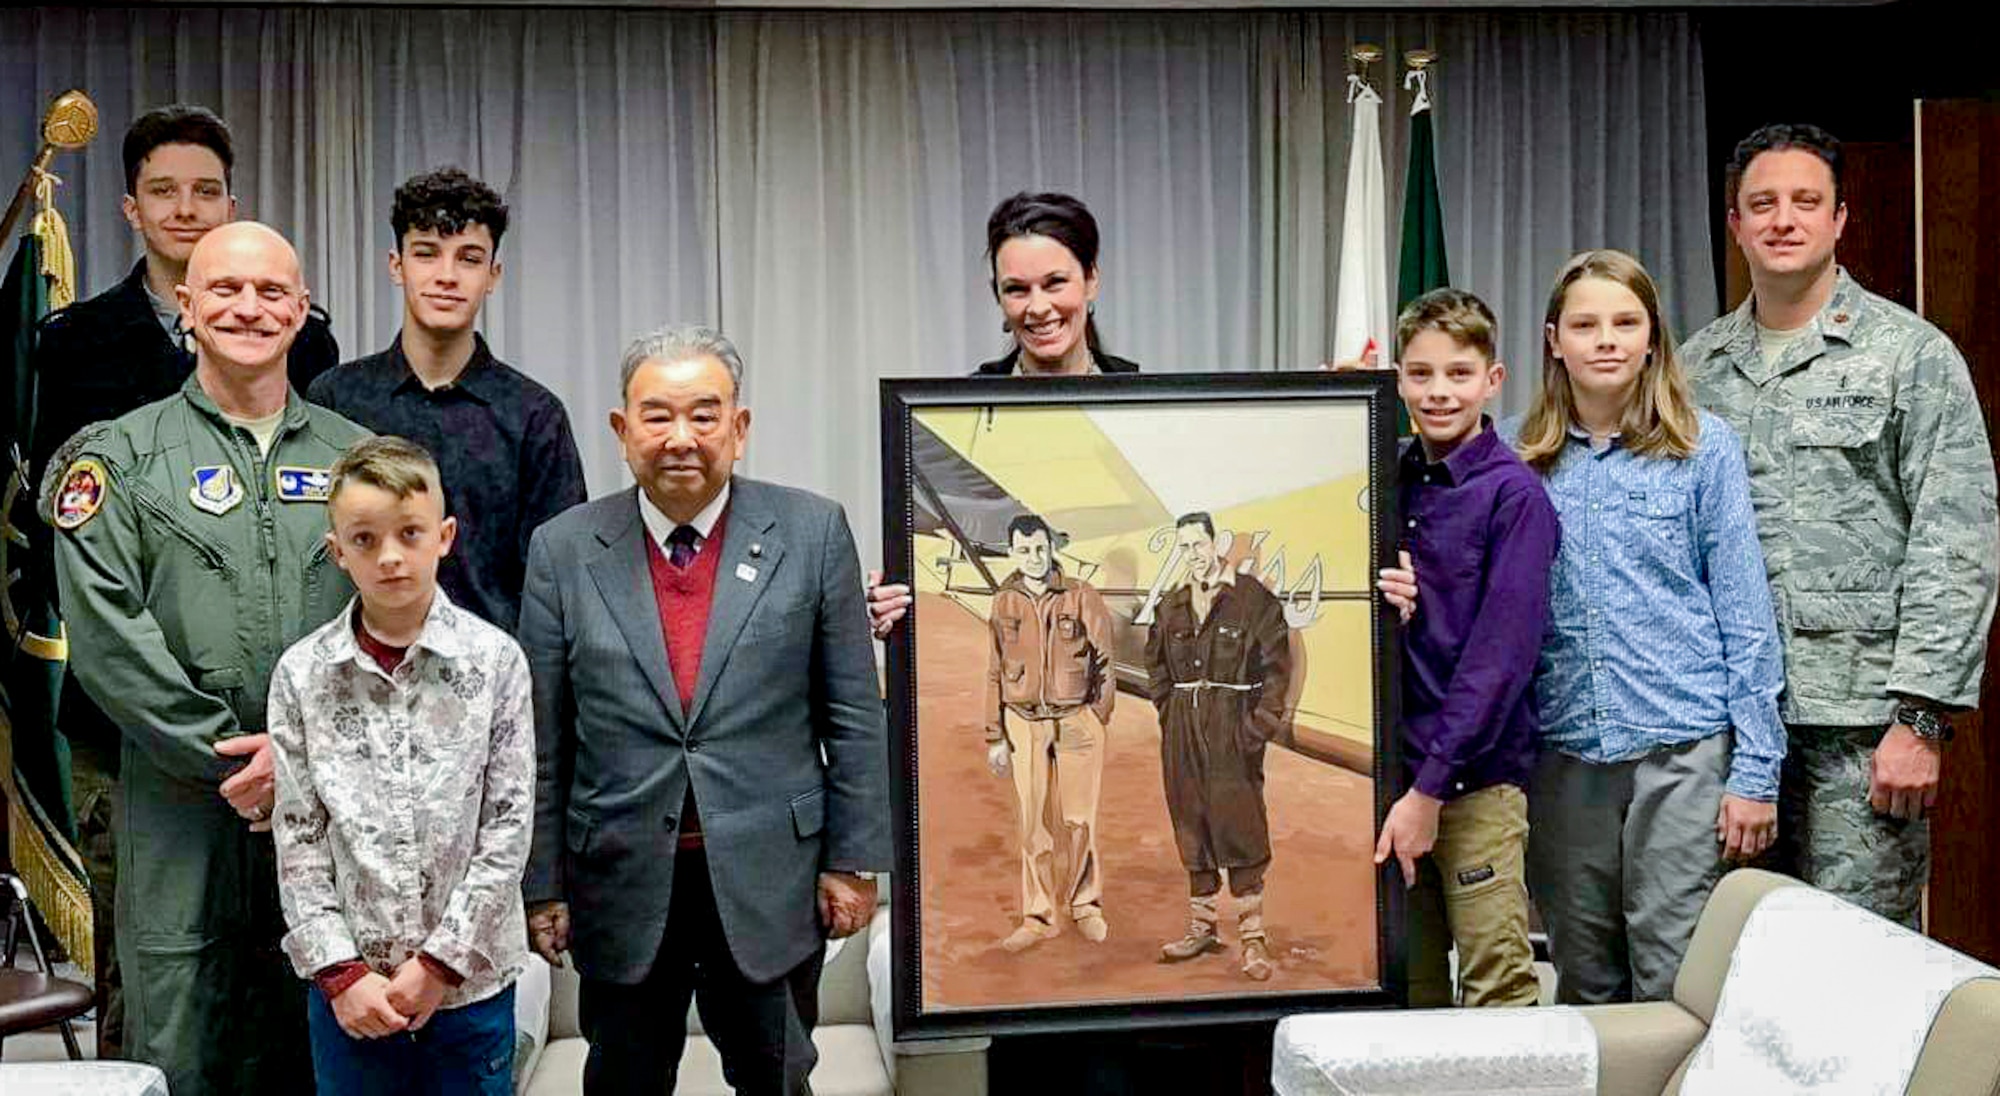 Sharon Smith, the wife of Maj. Brian Smith, a physical therapist with the 35th Medical Operations Squadron, poses for a photo with Misawa Mayor Kazumasa Taneichi and U.S. Air Force Col. R. Scott Jobe, a former 35th Fighter Wing commander, after the mayor received a photo from Smith at Misawa Air Base, Japan, in 2017. Smith owned the photo from a family relative, which detailed the two pilots of the “Miss Veedol” aircraft who made the first Trans-Pacific flight from Japan to the U.S. on Oct. 5, 1931. The gift and piece of history strengthened relations between the U.S. military community and Japan and remains in Misawa City Hall today. (Courtesy photo)